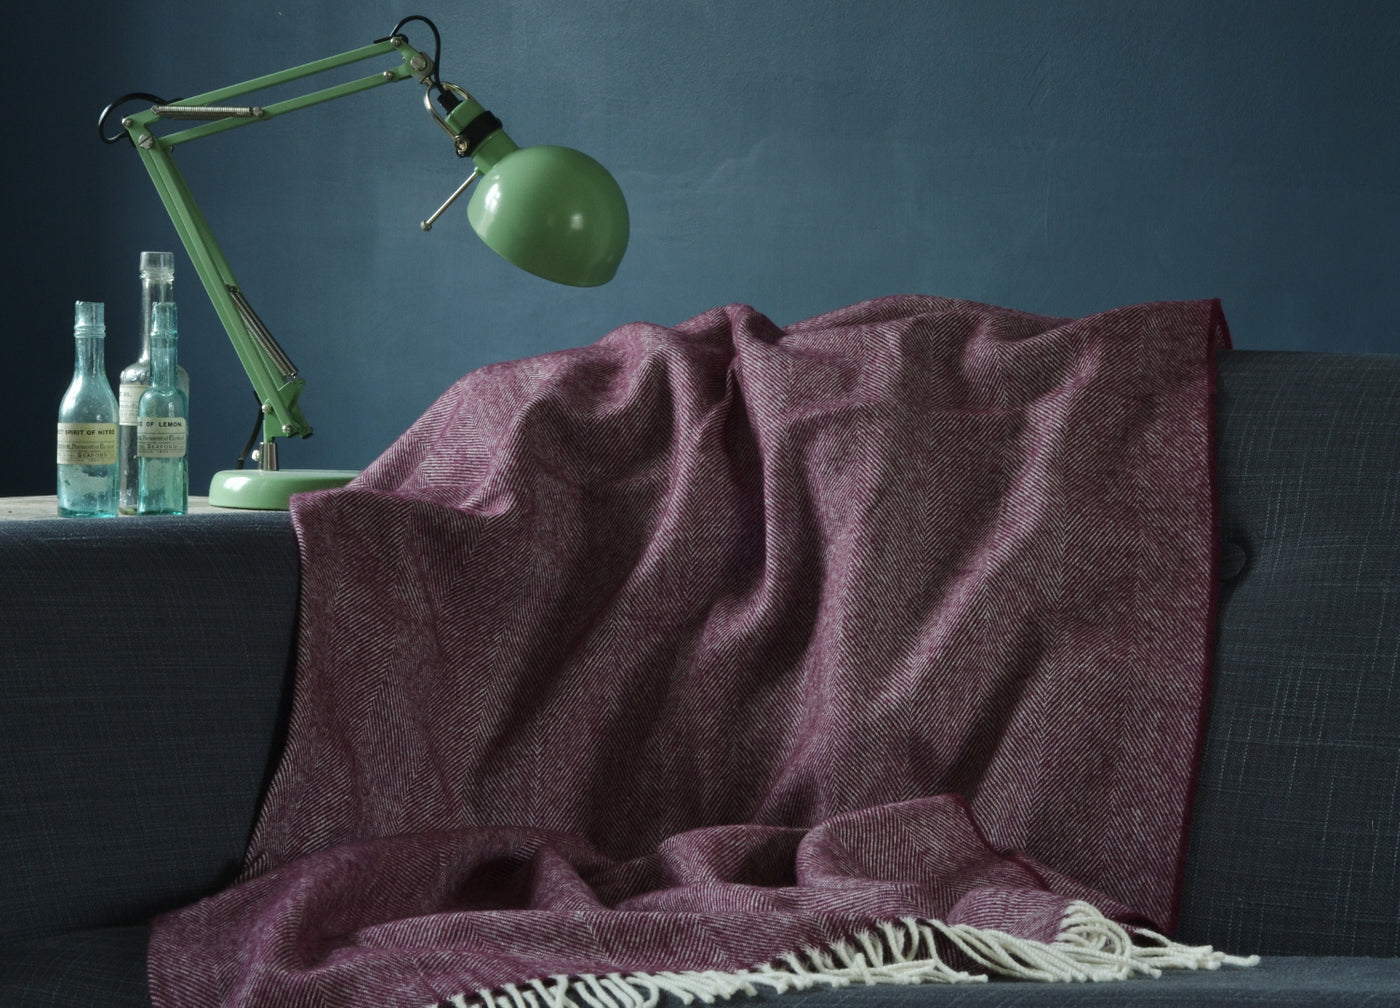 Large purple herringbone wool blanket draped over a sofa with green lamp and glass bottles on the left.